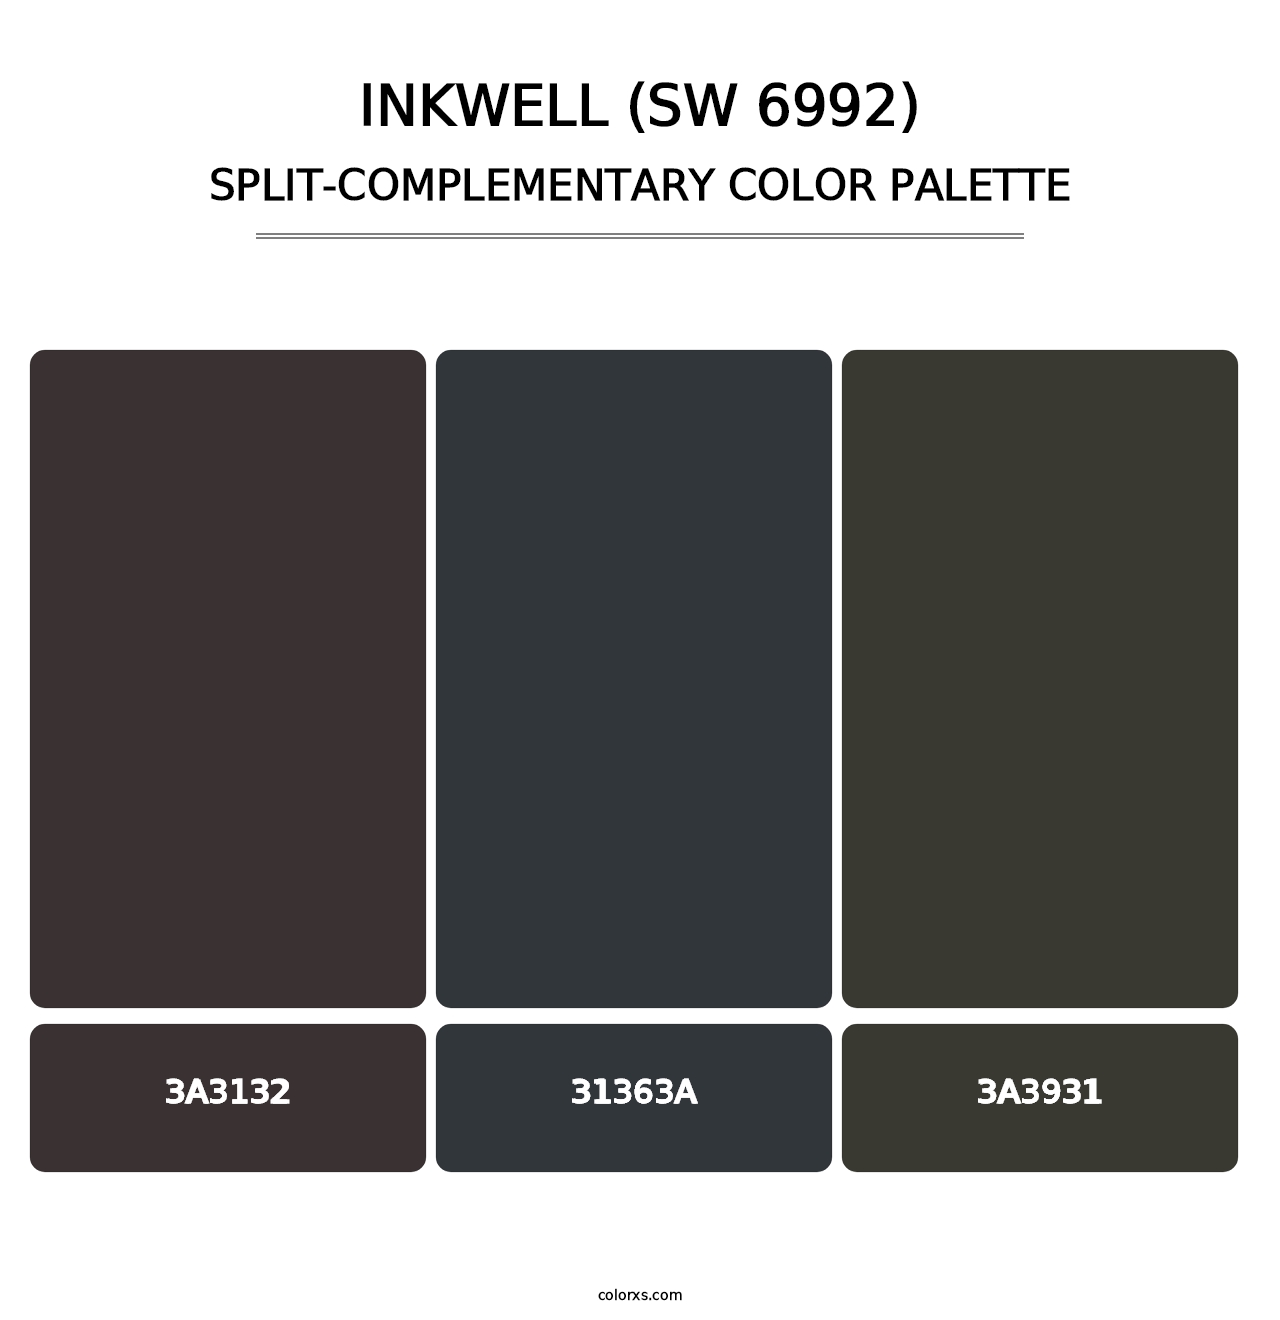 Inkwell (SW 6992) - Split-Complementary Color Palette